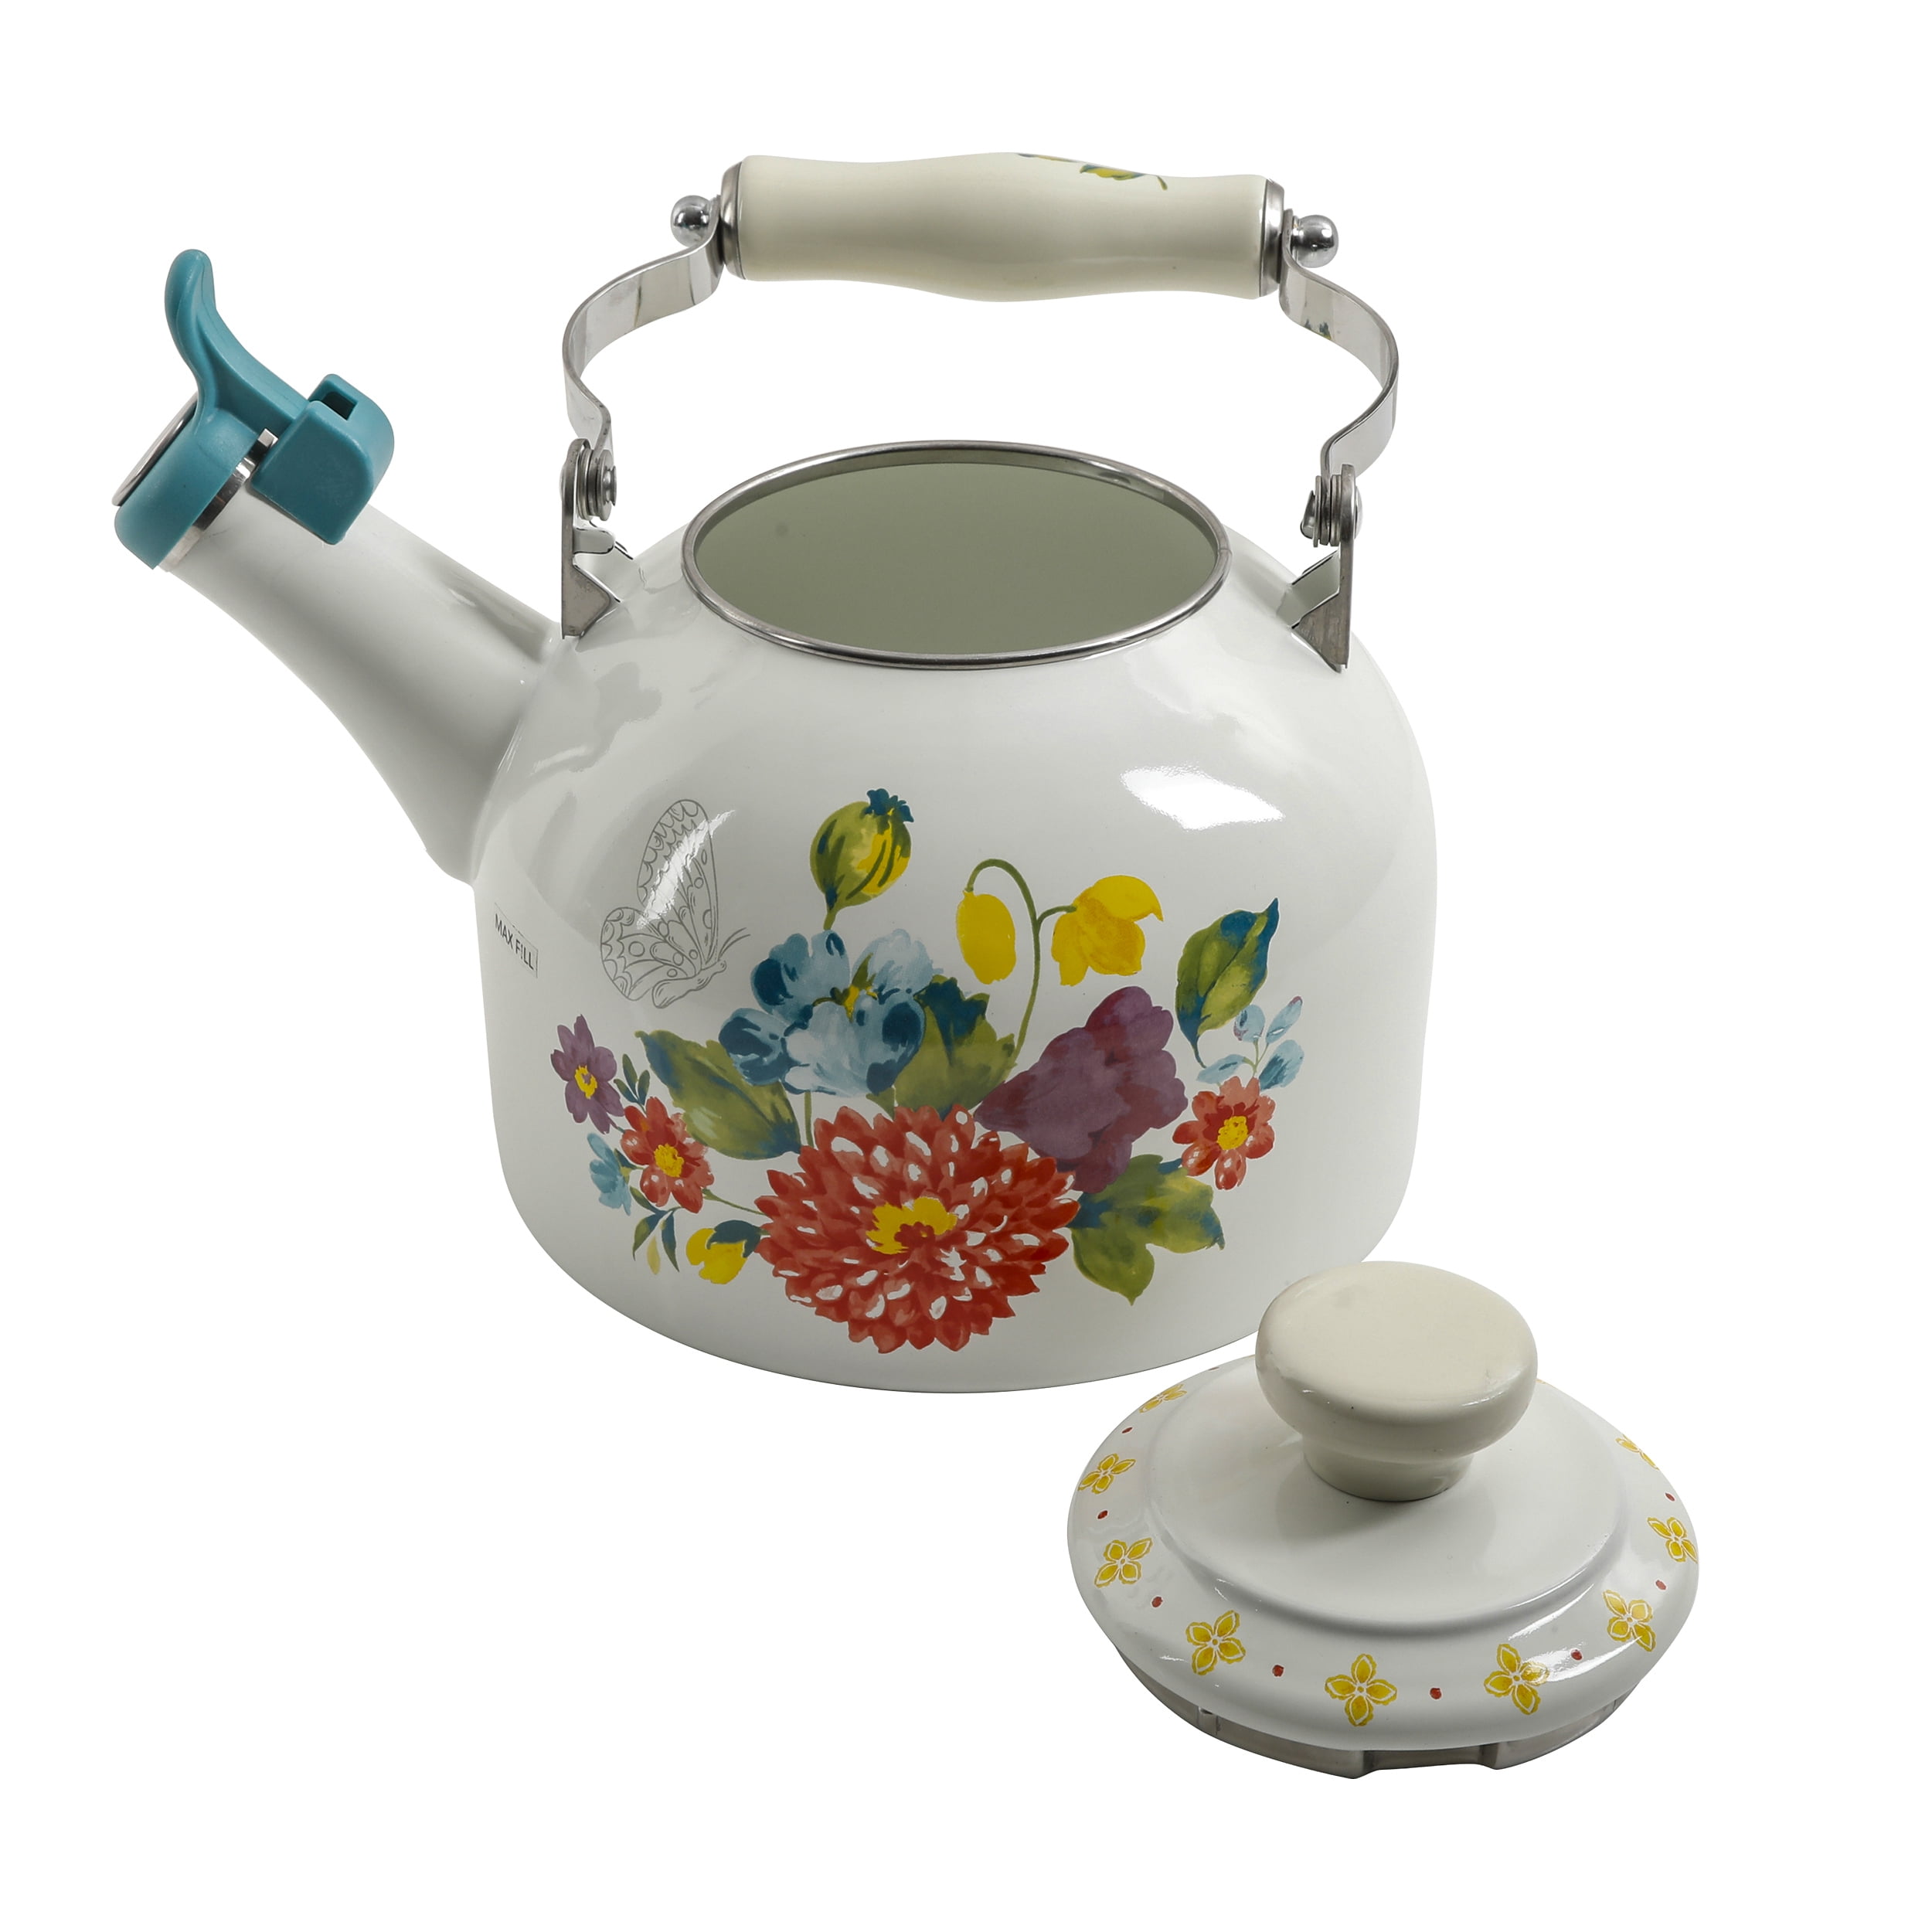 Details about  / The Pioneer Woman Blooming Bouquet 2-Quart Tea Kettle